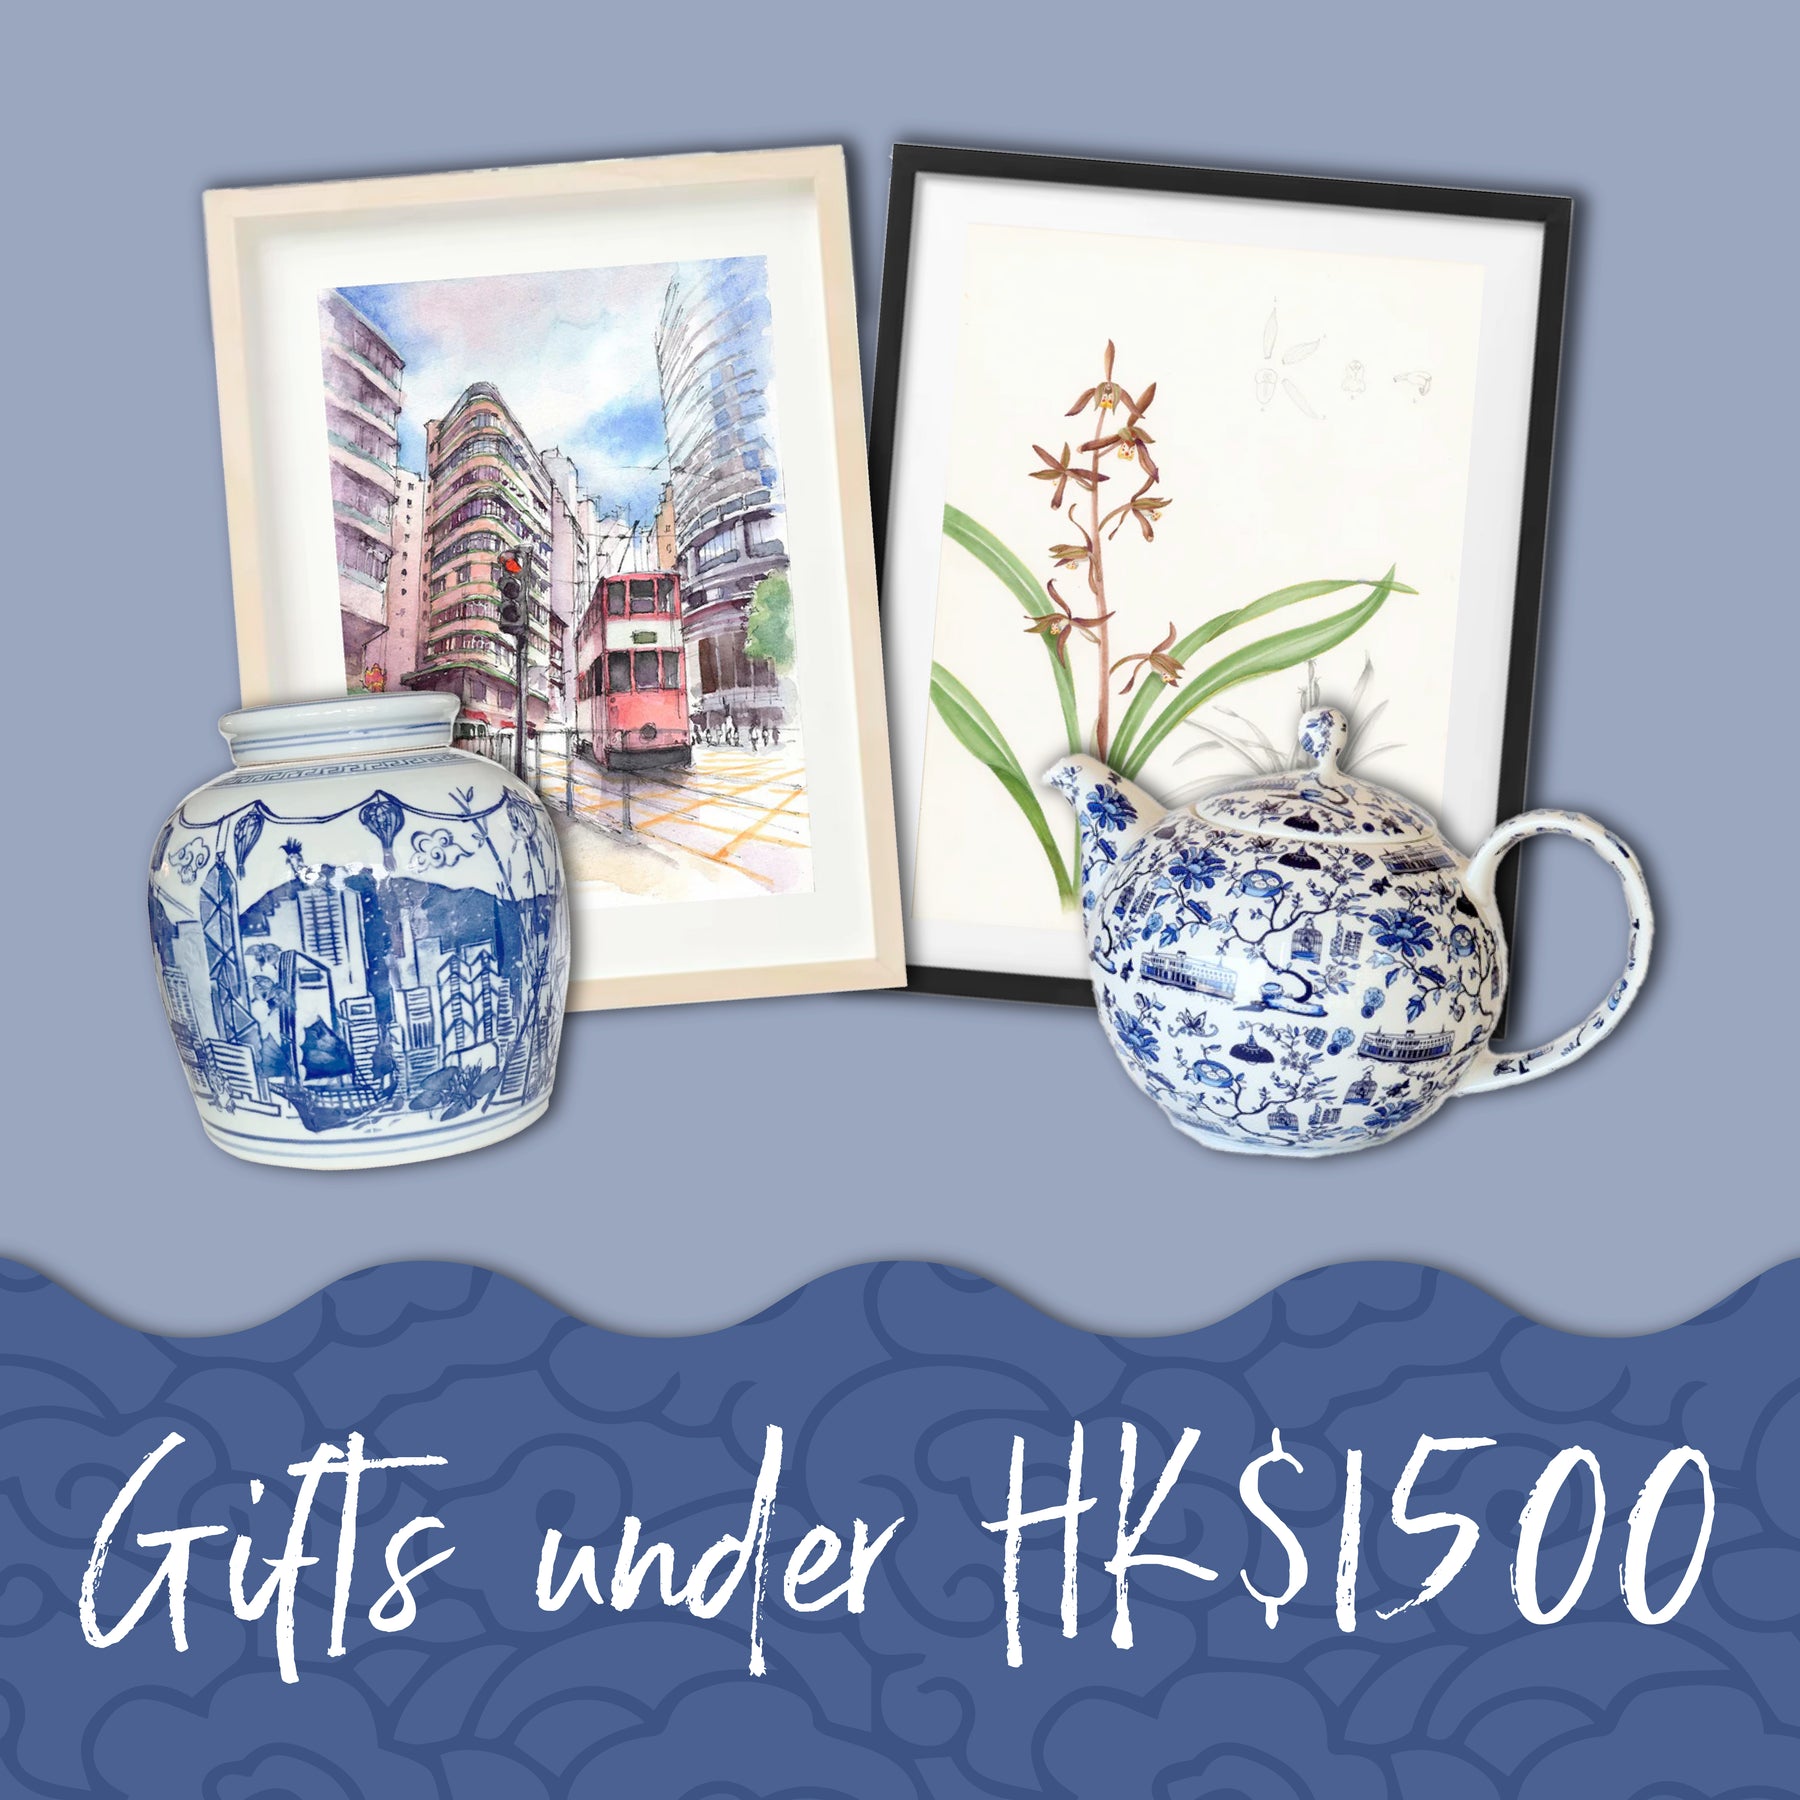 Gifts Under HK$1500